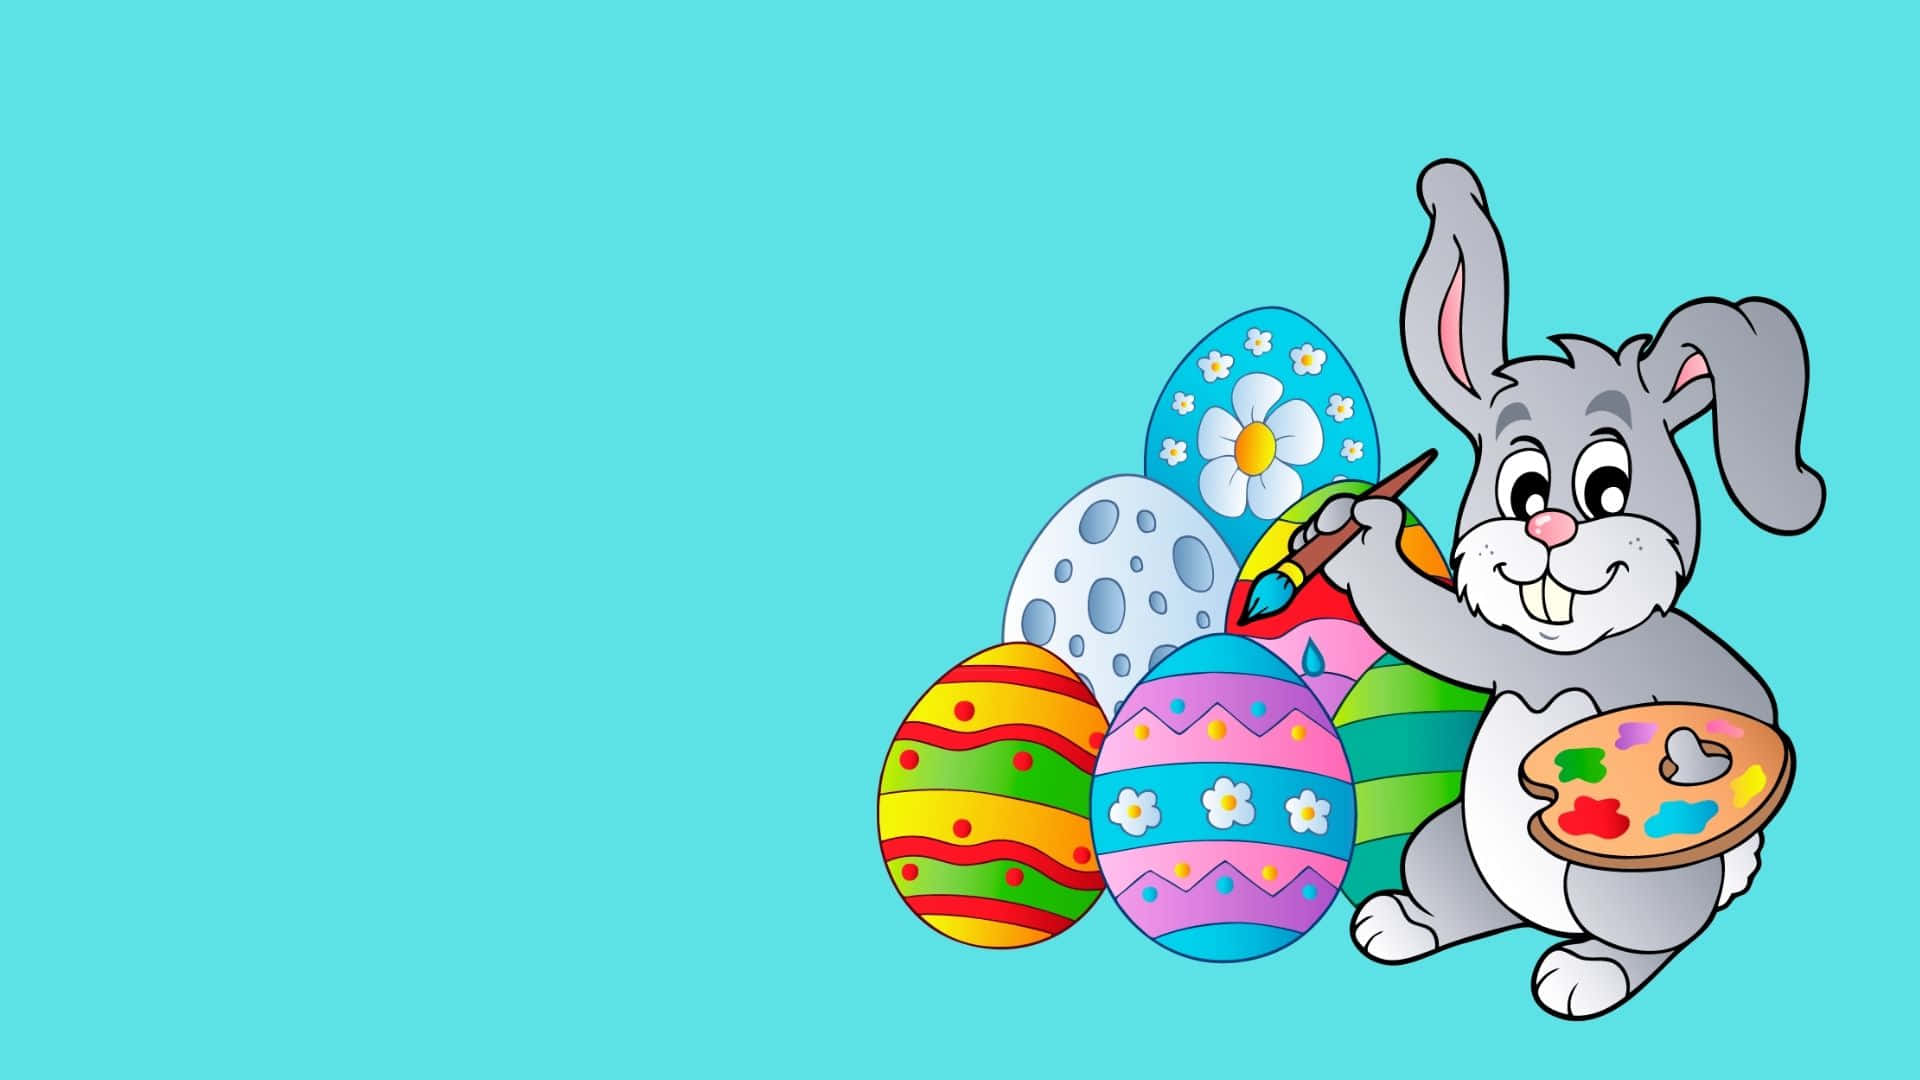 Don't be late! The Easter Bunny waits eagerly for you! Wallpaper